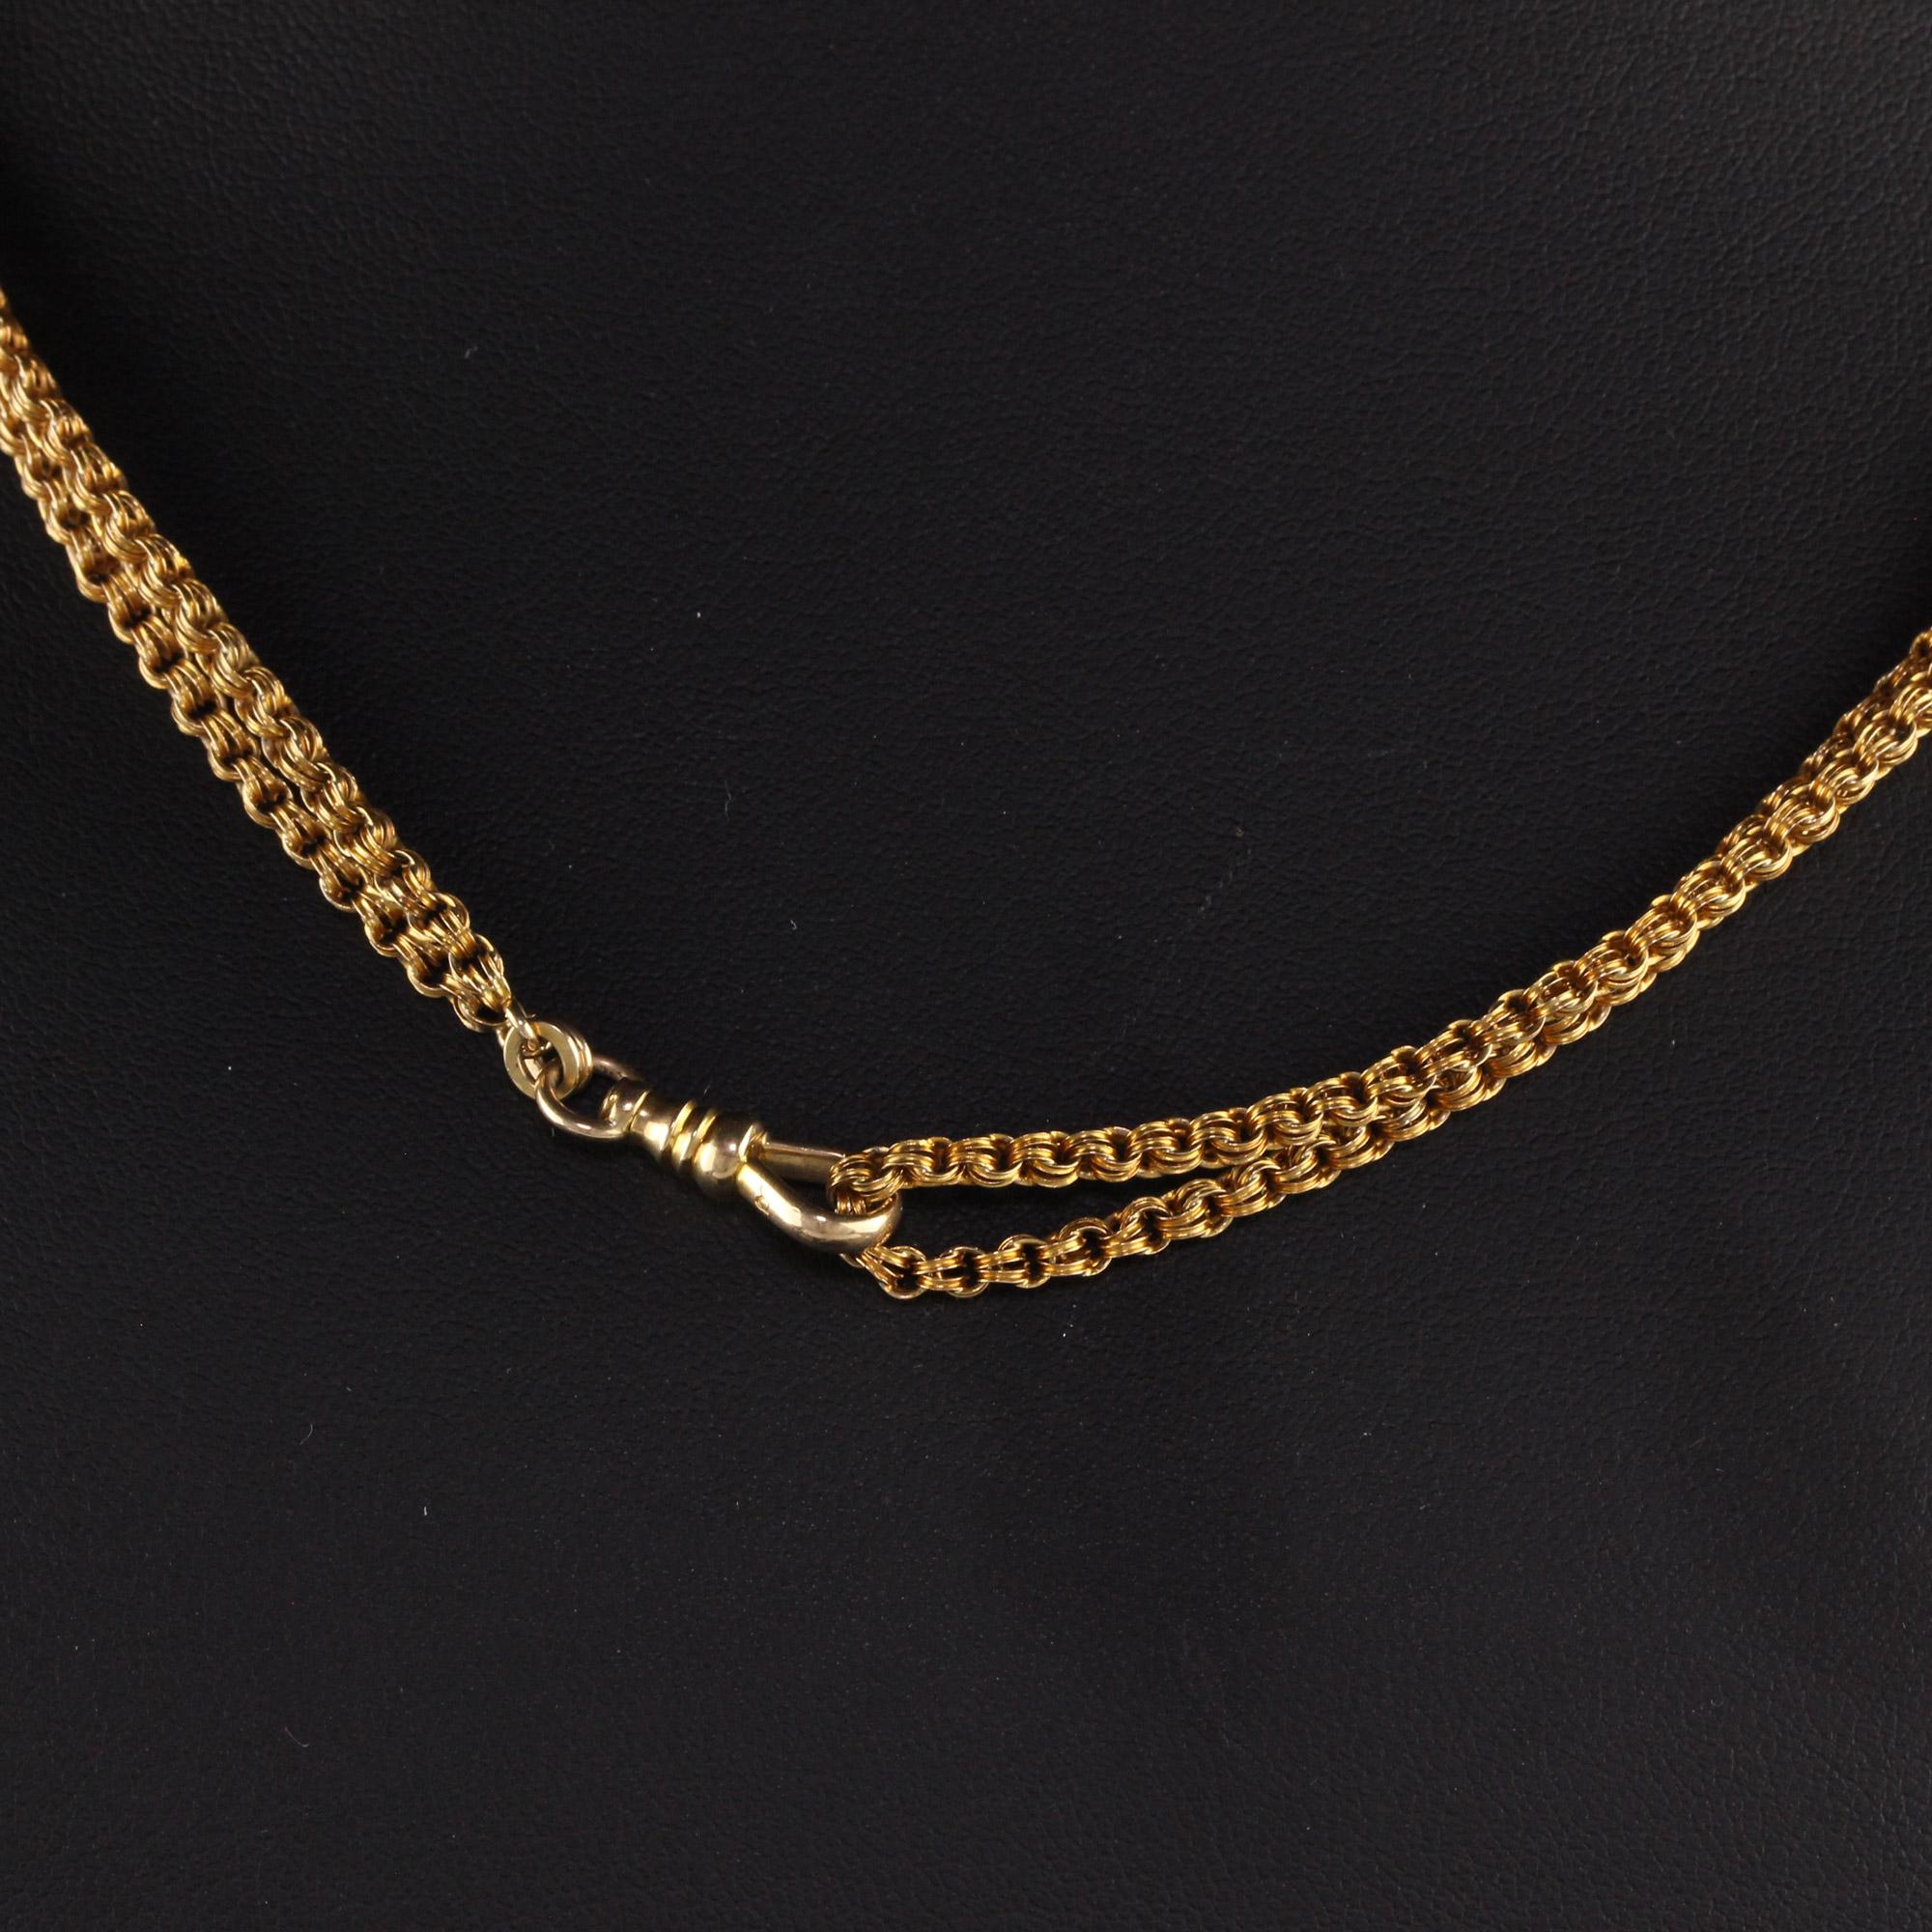 Antique Victorian 14K Yellow Gold Old Euro Diamond Lariat Necklace - 50 inches 3